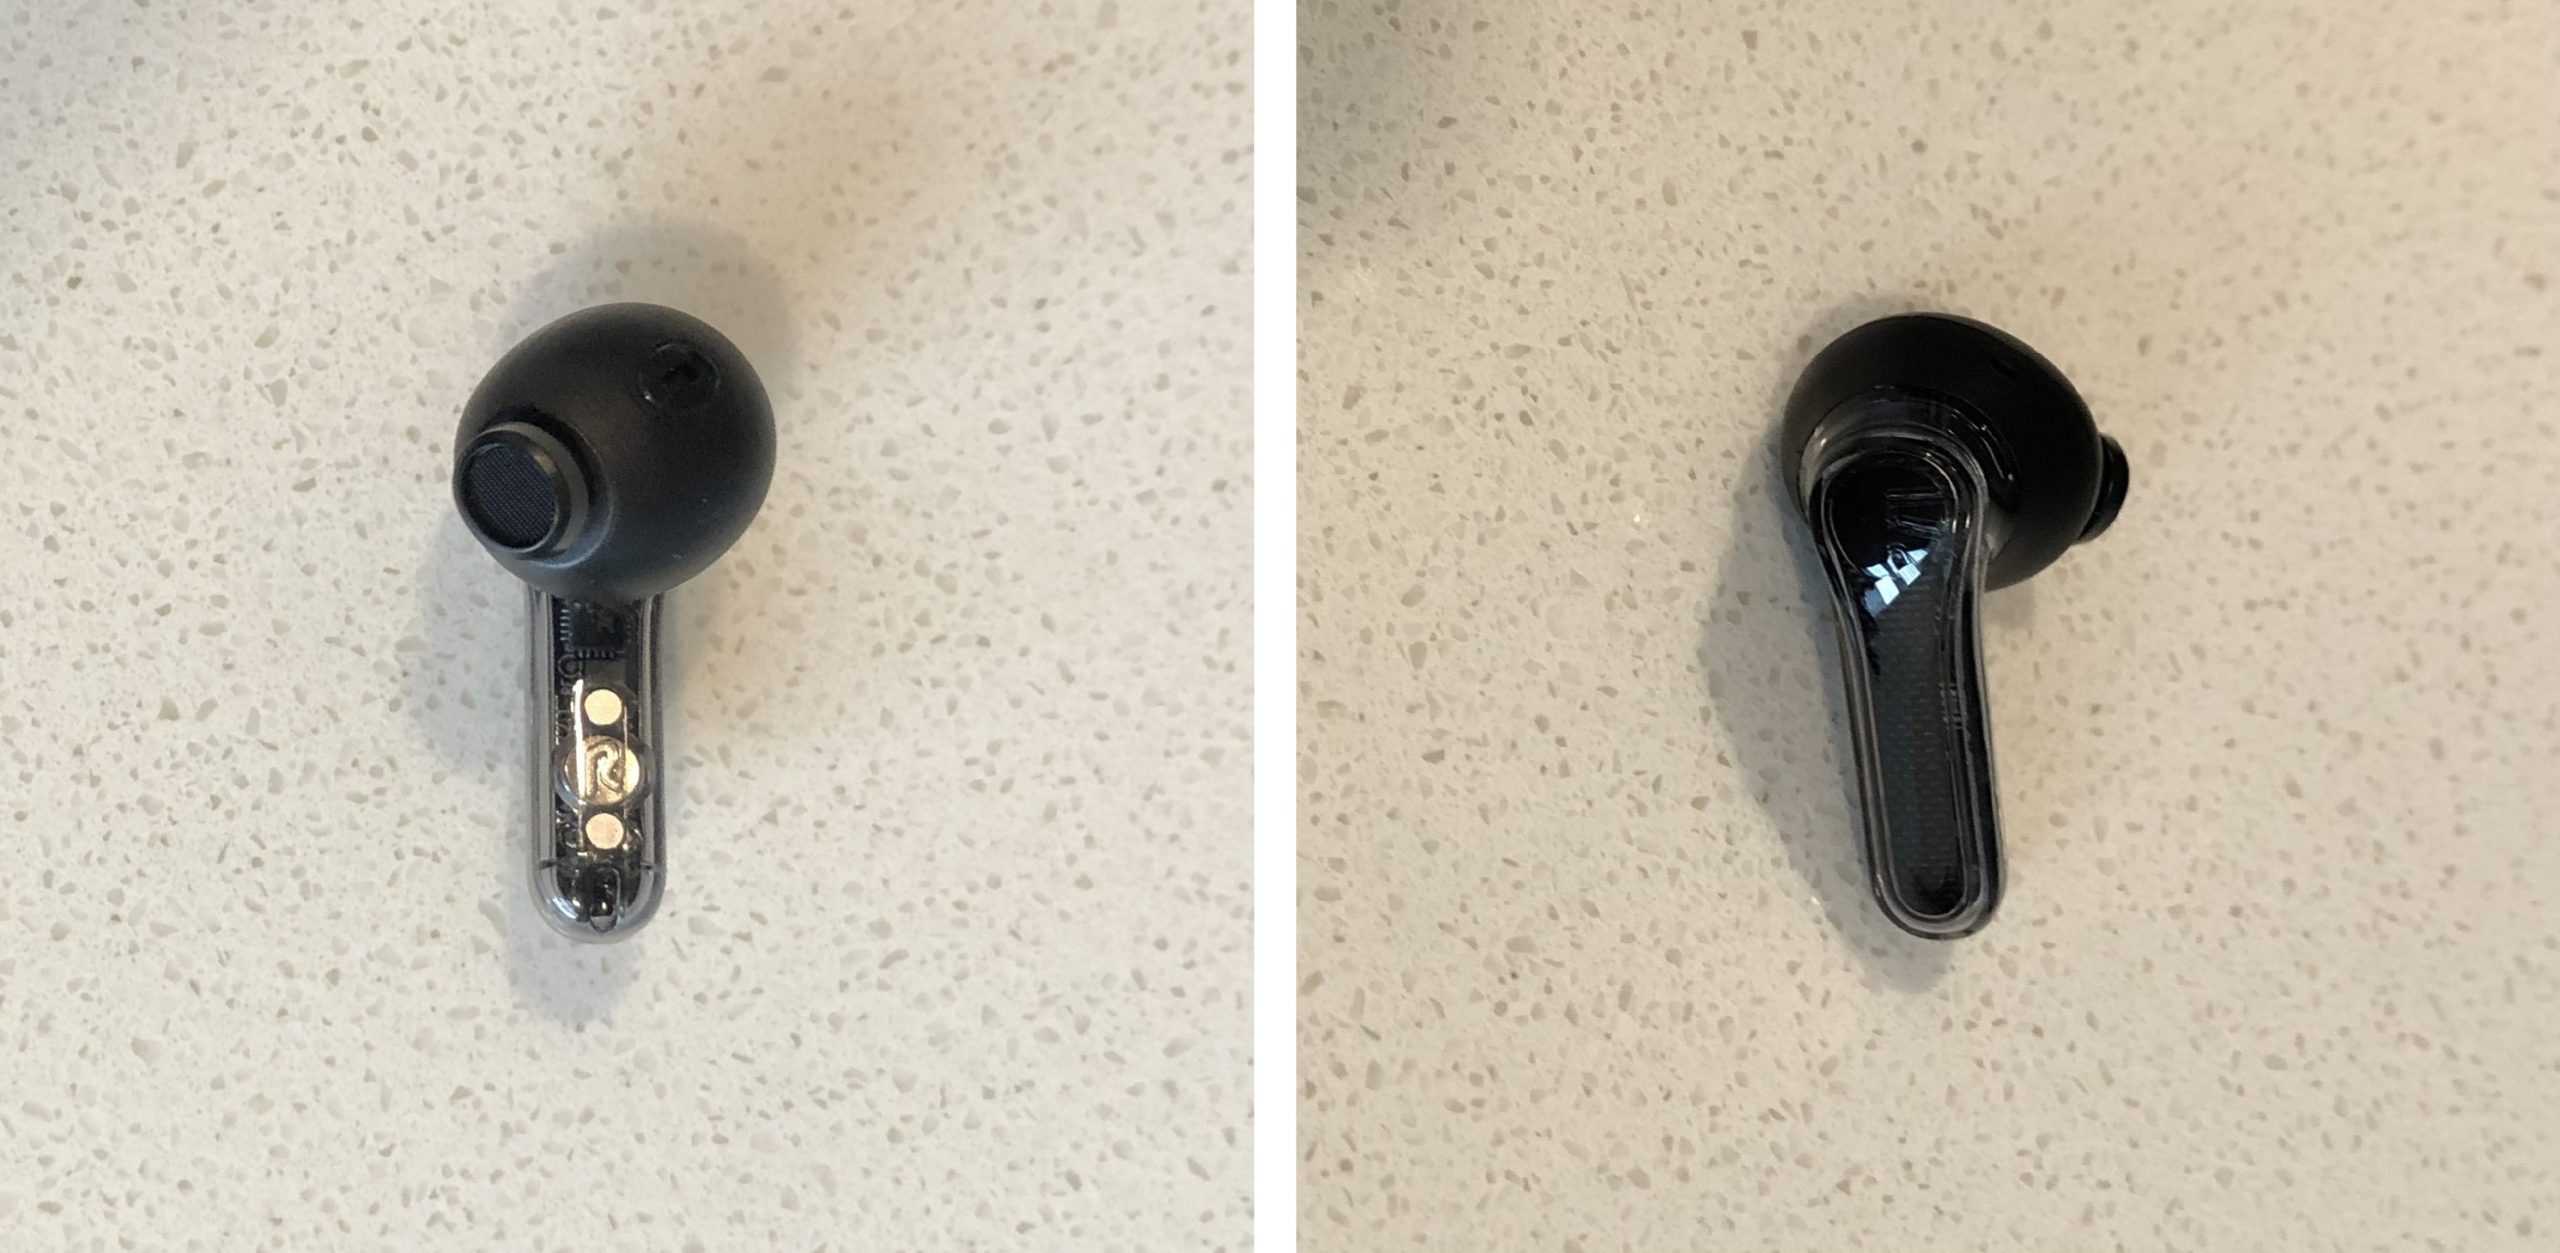 SoundPEATS Clear earbud front and back